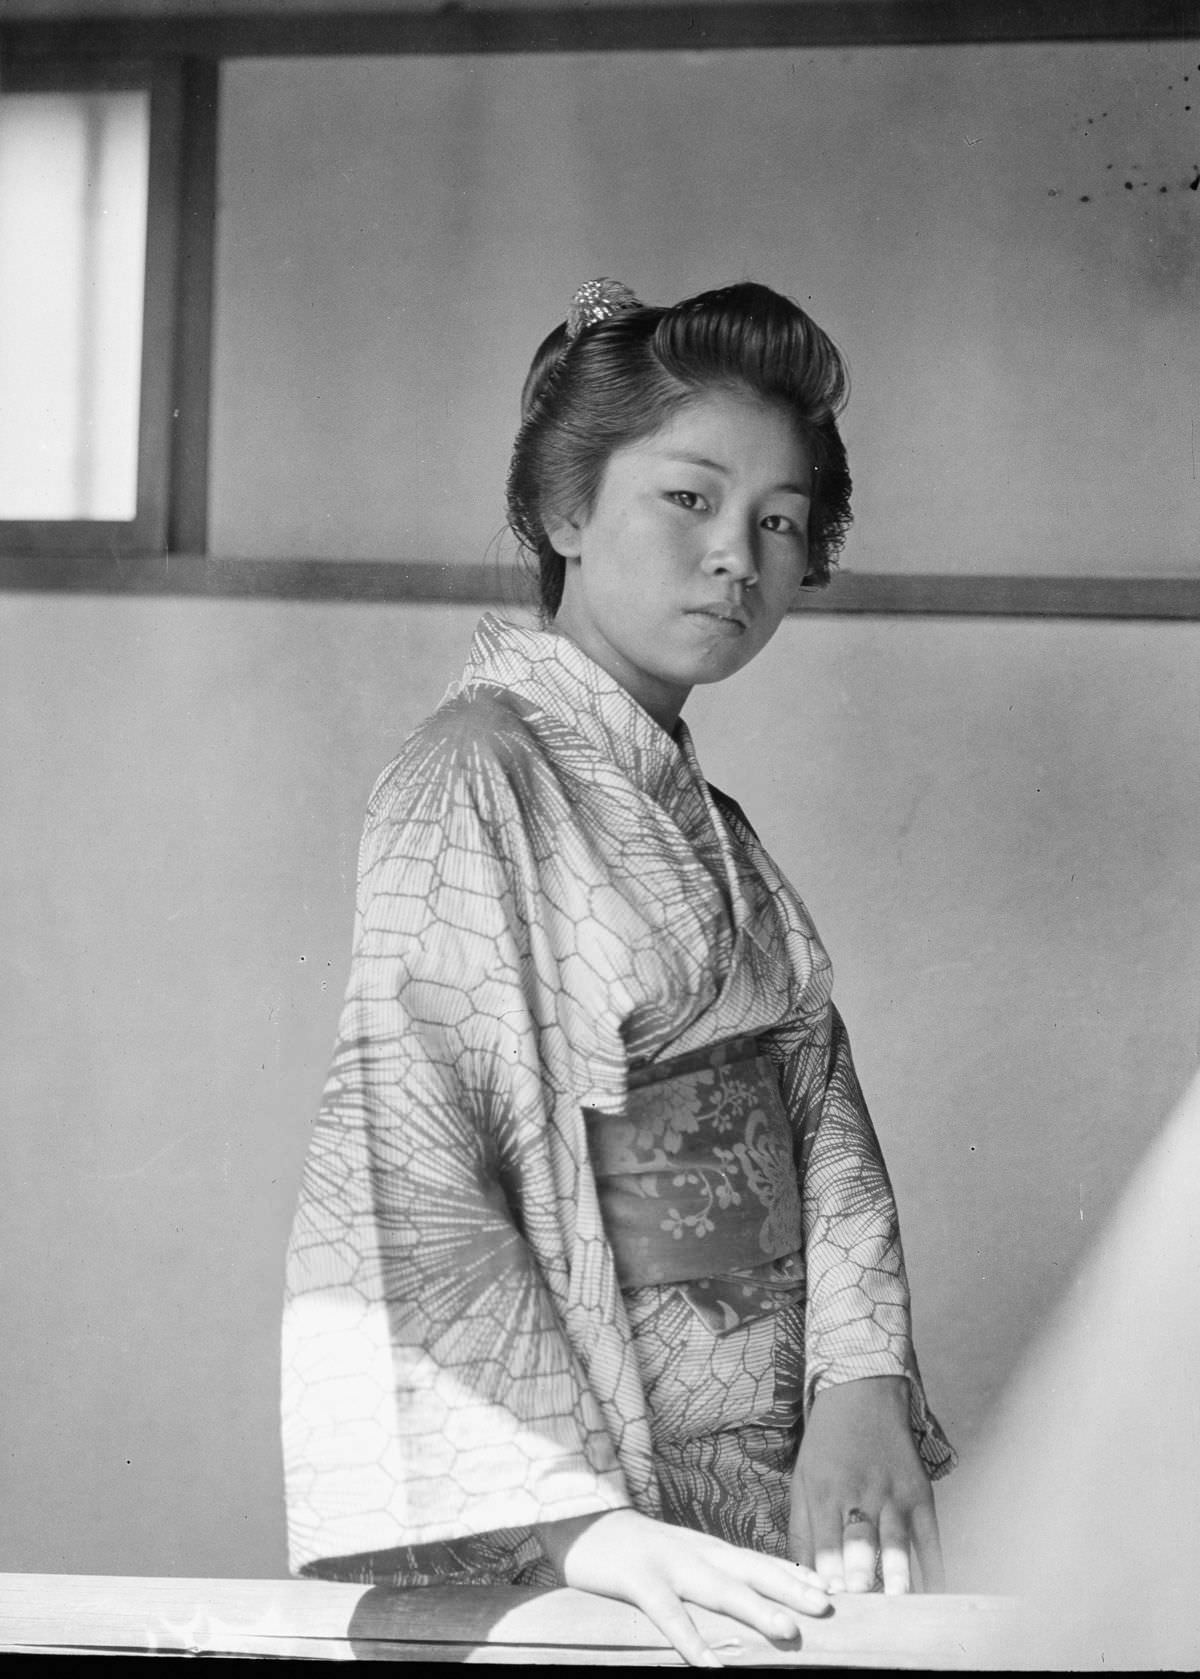 The End Of Meiji Period: Stunning Historical Photos Capturing Biggest Era Of Change In Japan